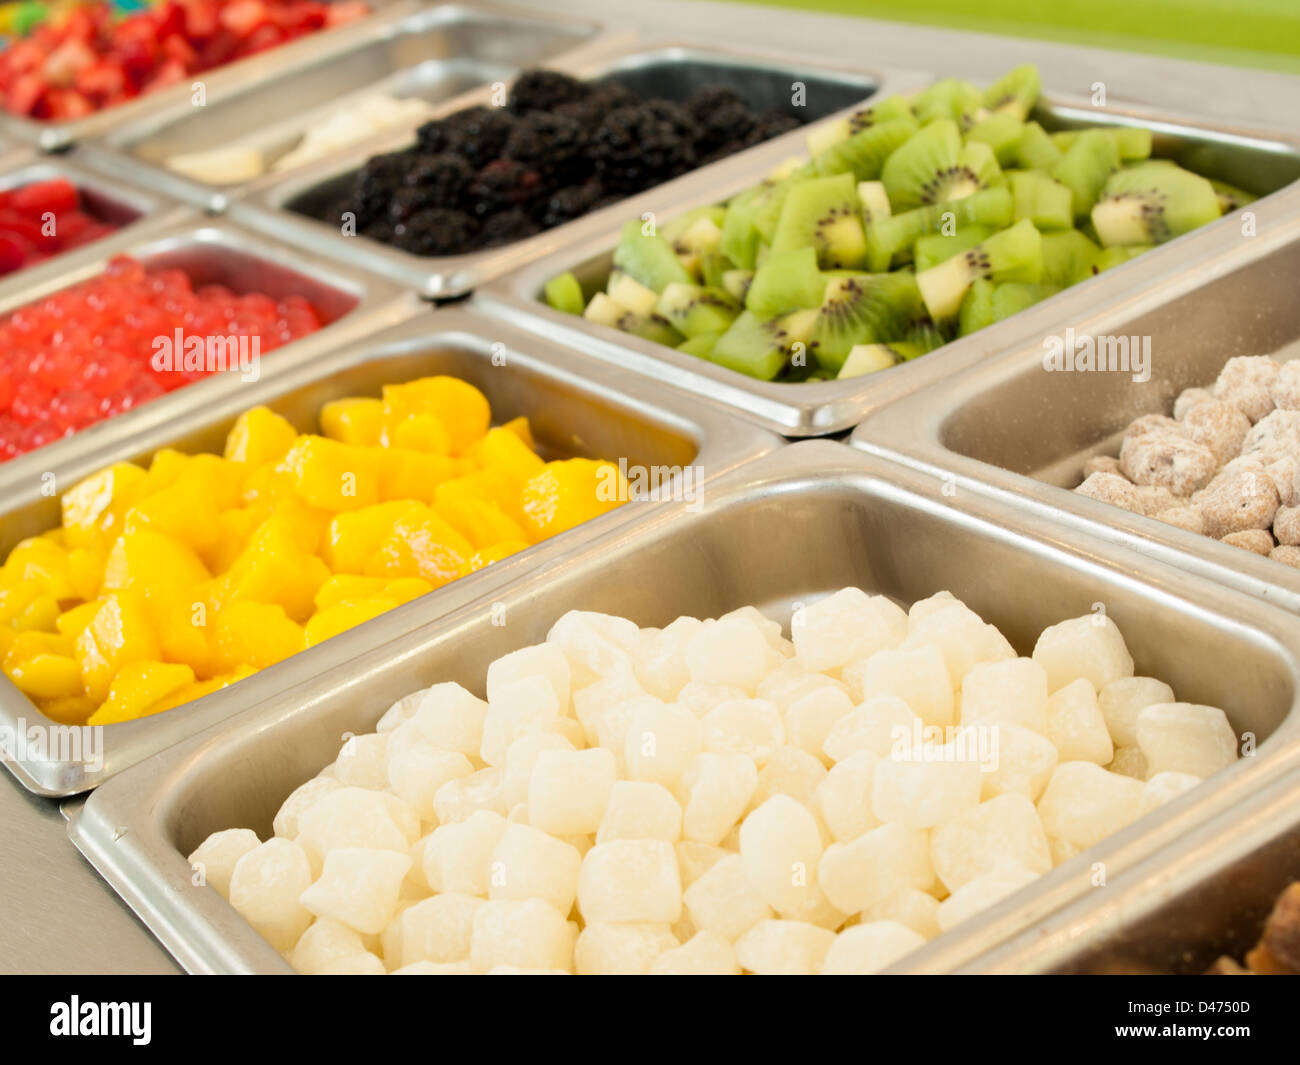 Frozen yogurt toppings bar. Yogurt toppings ranging from fresh fruits,  nuts, fresh-cut candies, syrups and sprinkles Stock Photo - Alamy